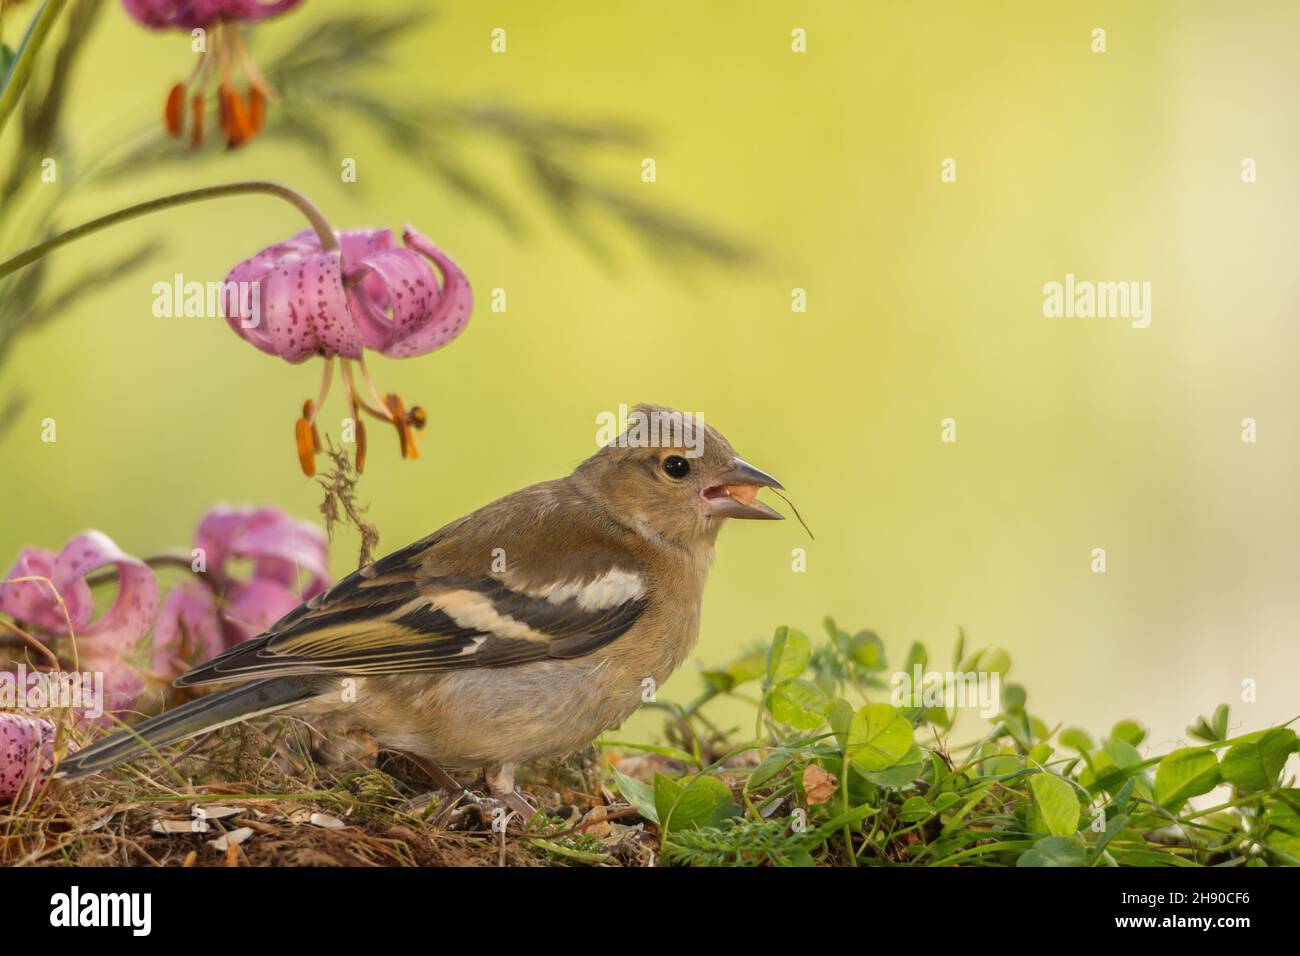 finch with seed in mouth in front of a lily Stock Photo